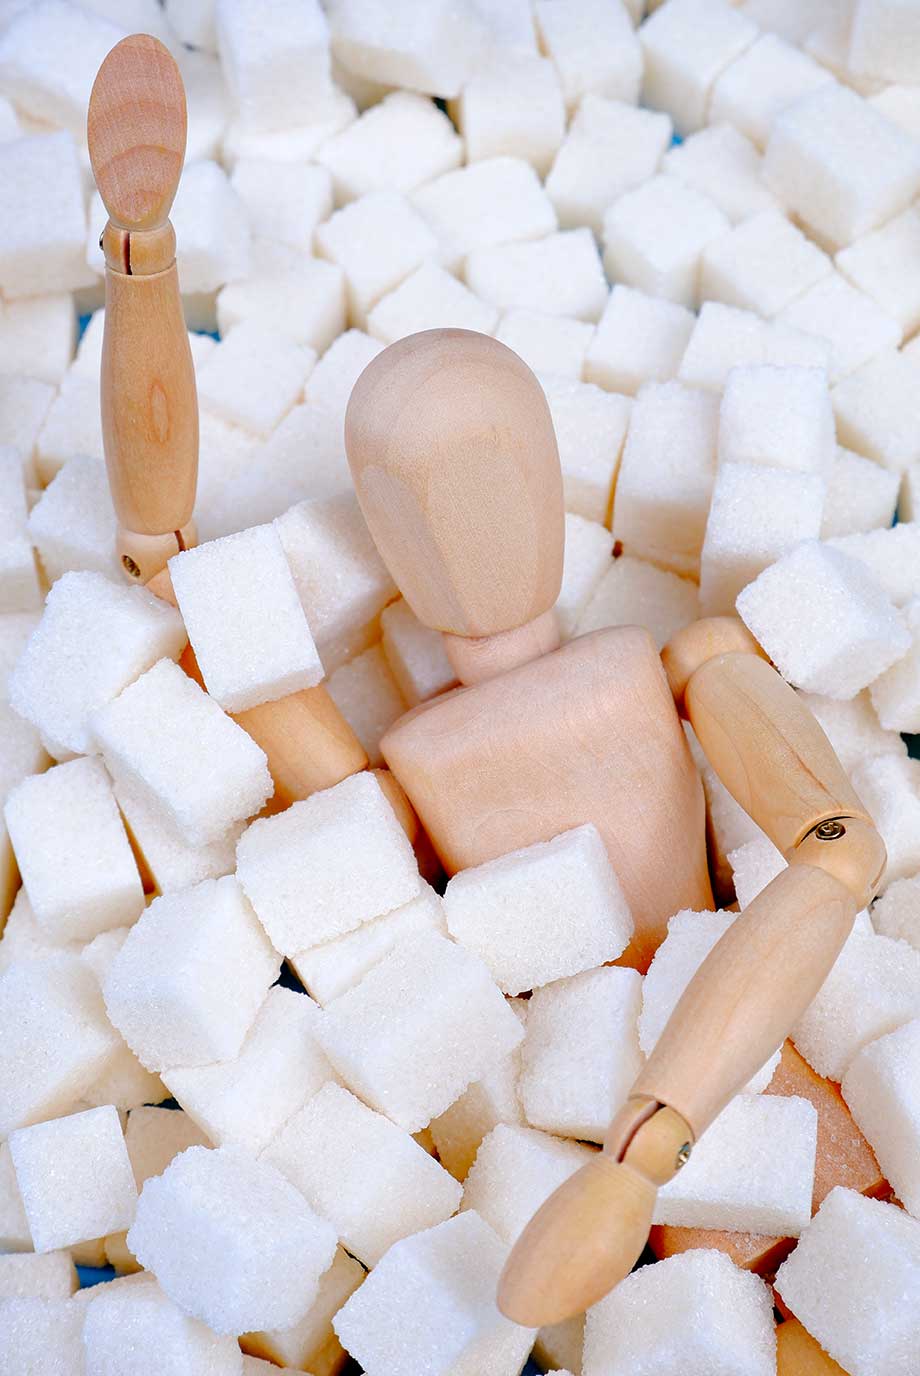 fake-body-covered-by-mounds-of-cane-sugar-cubes-suggesting-sugarholic